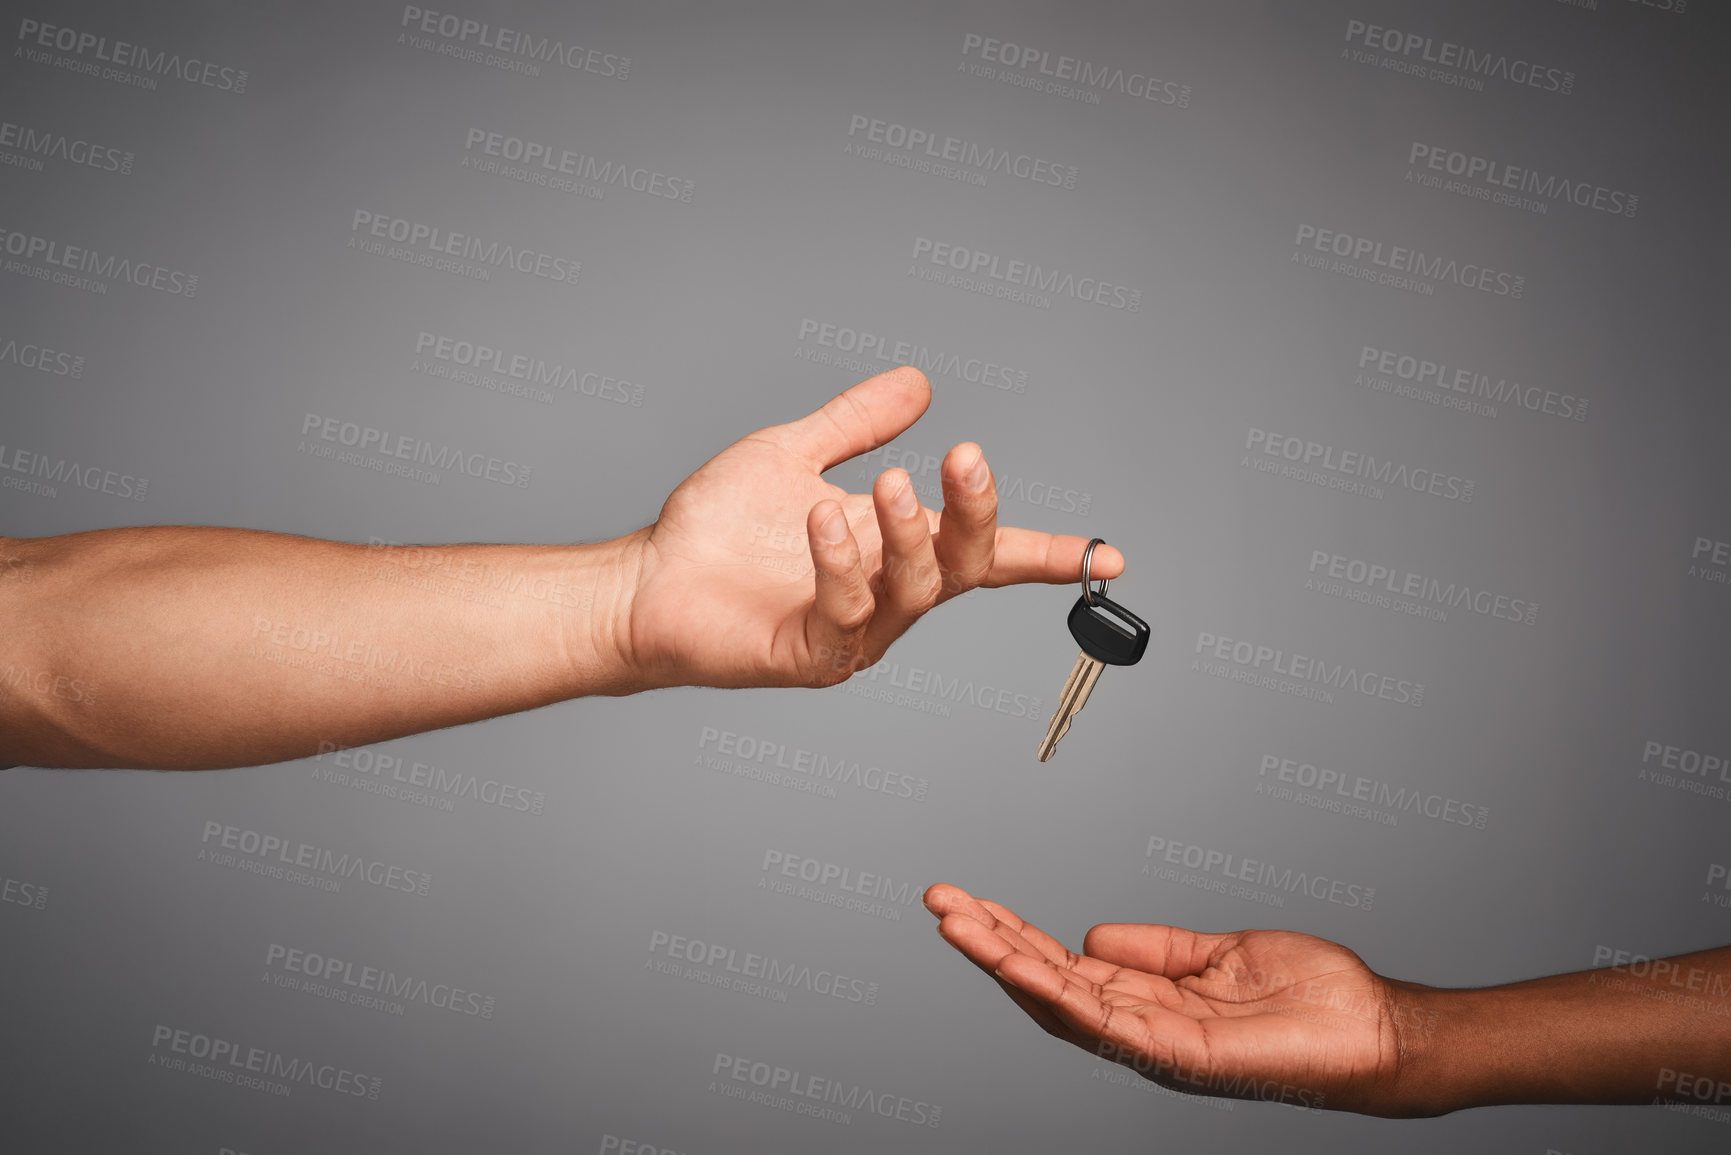 Buy stock photo Studio shot of unidentifiable hands exchanging keys against a gray background